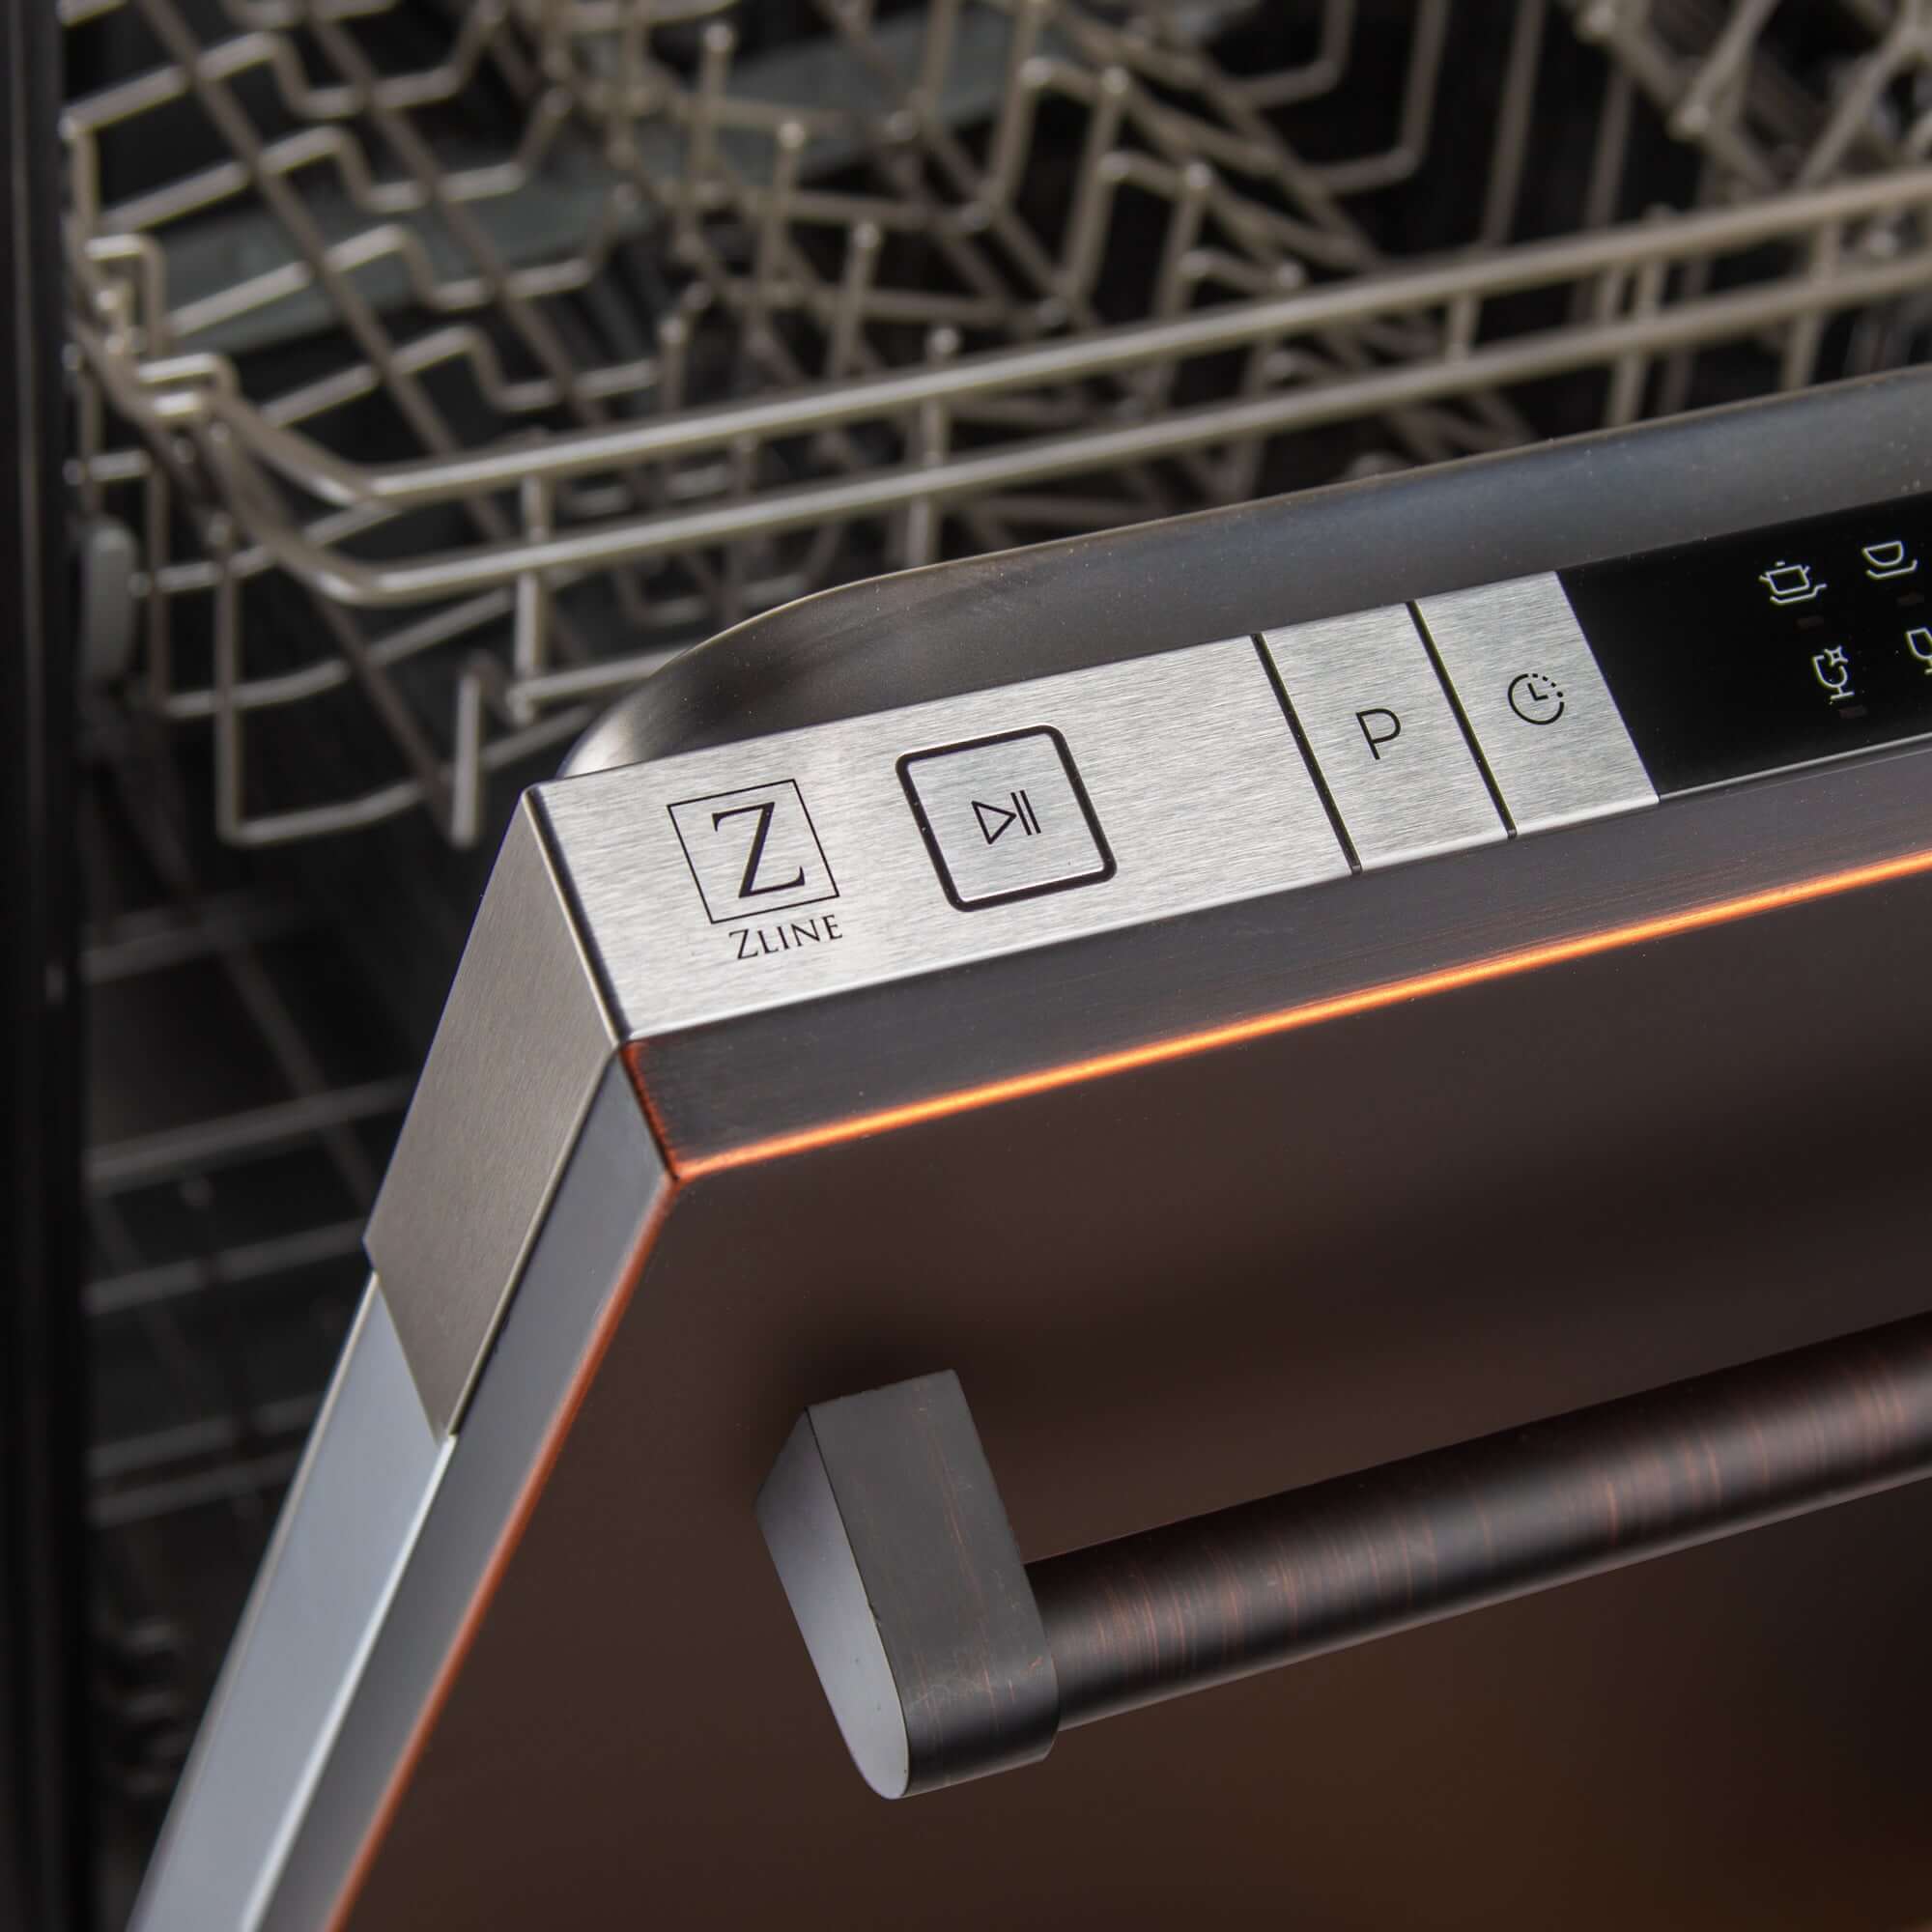 ZLINE 24 in. Oil-Rubbed Bronze Top Control Built-In Dishwasher with Stainless Steel Tub and Traditional Style Handle, 52dBa (DW-ORB-H-24) front, closed.